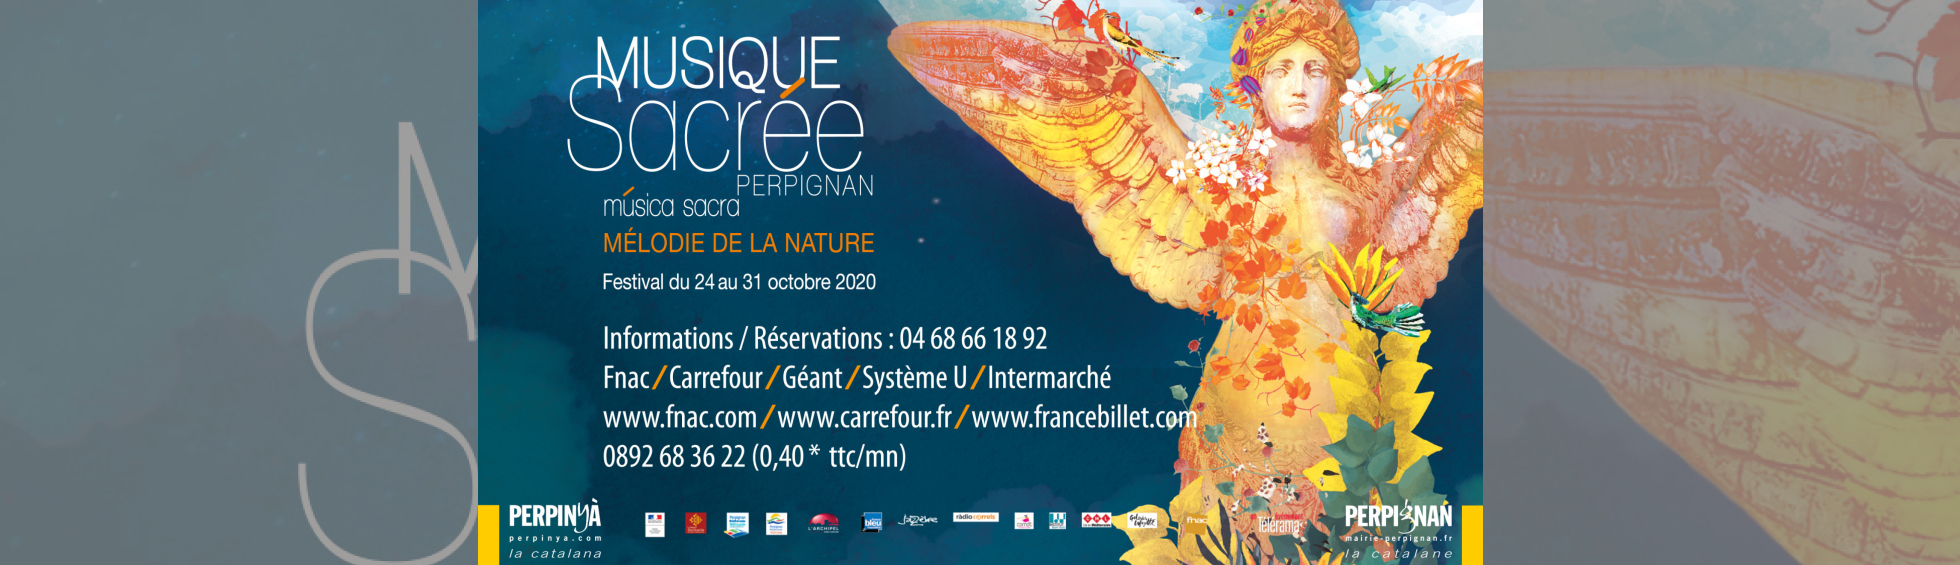 INFORMATIONS - RESERVATIONS